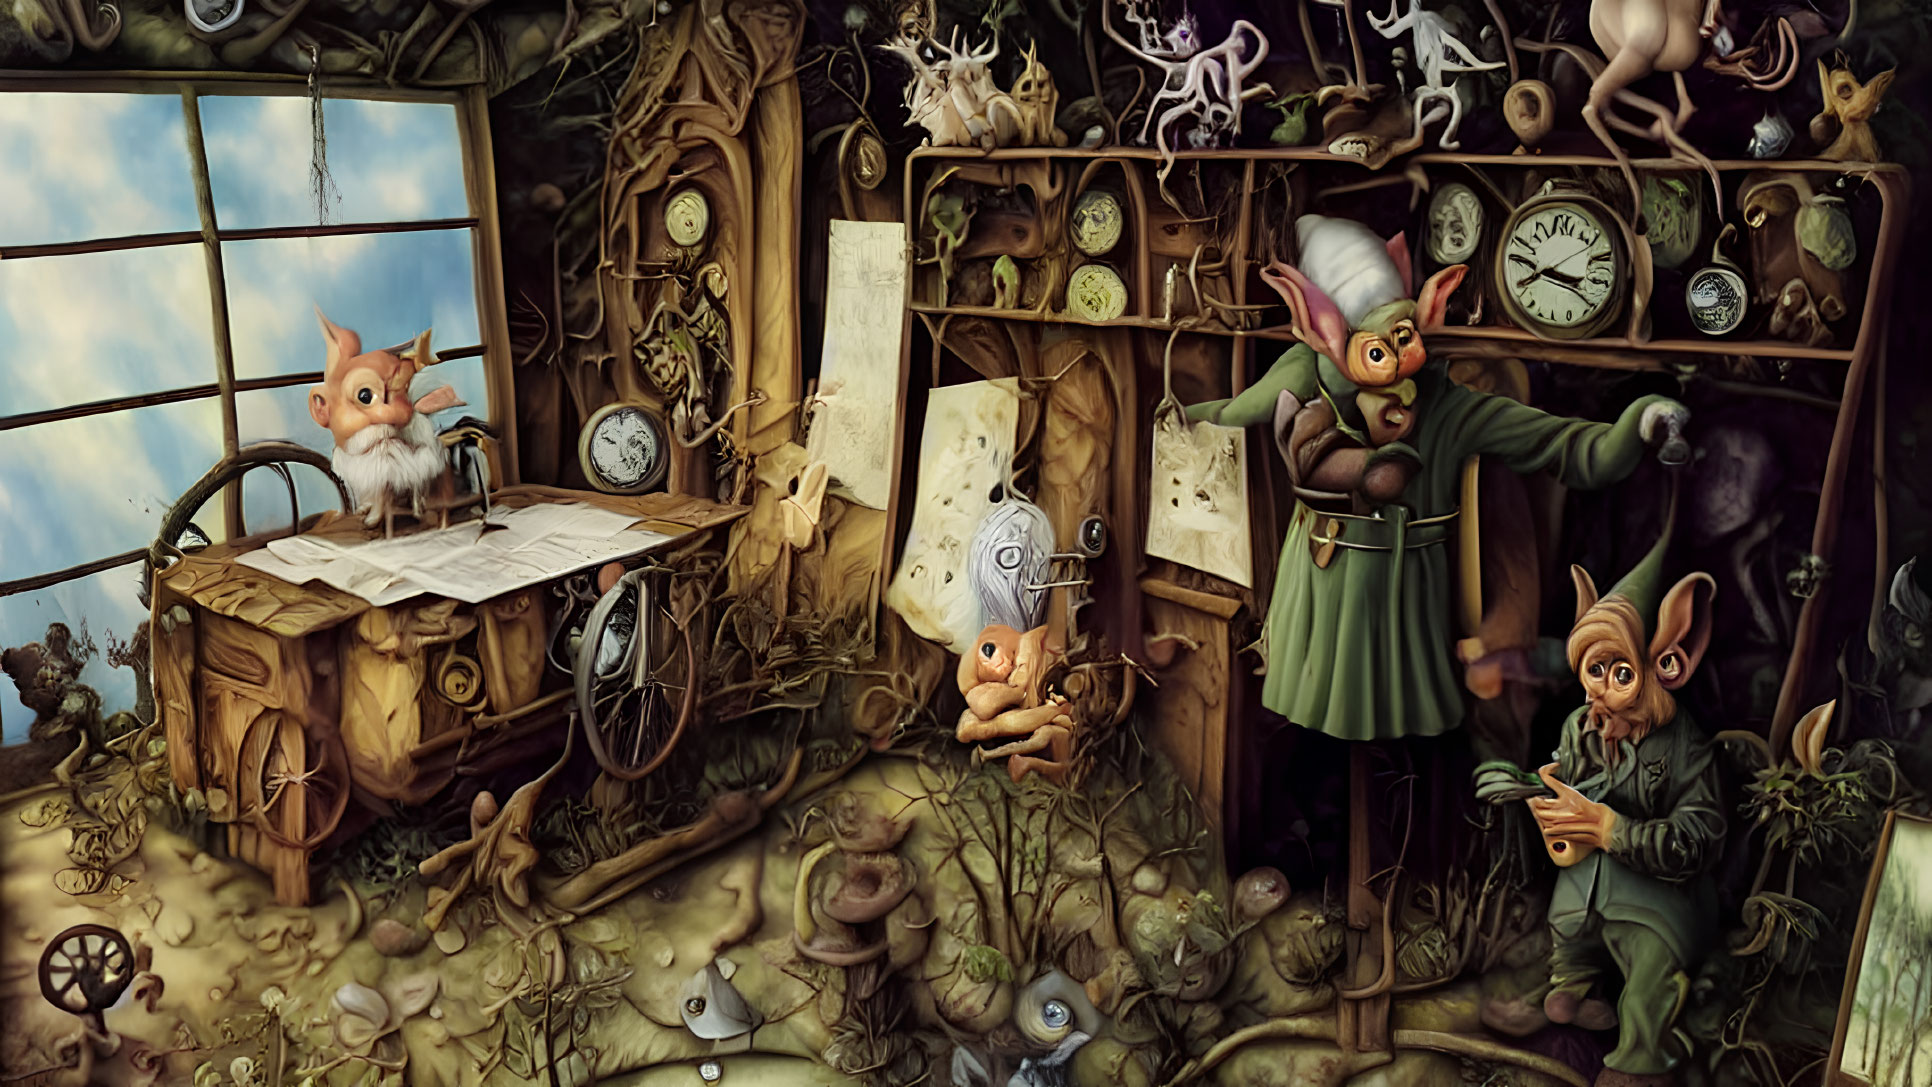 Anthropomorphic foxes in workshop with clock parts & fantastical creatures